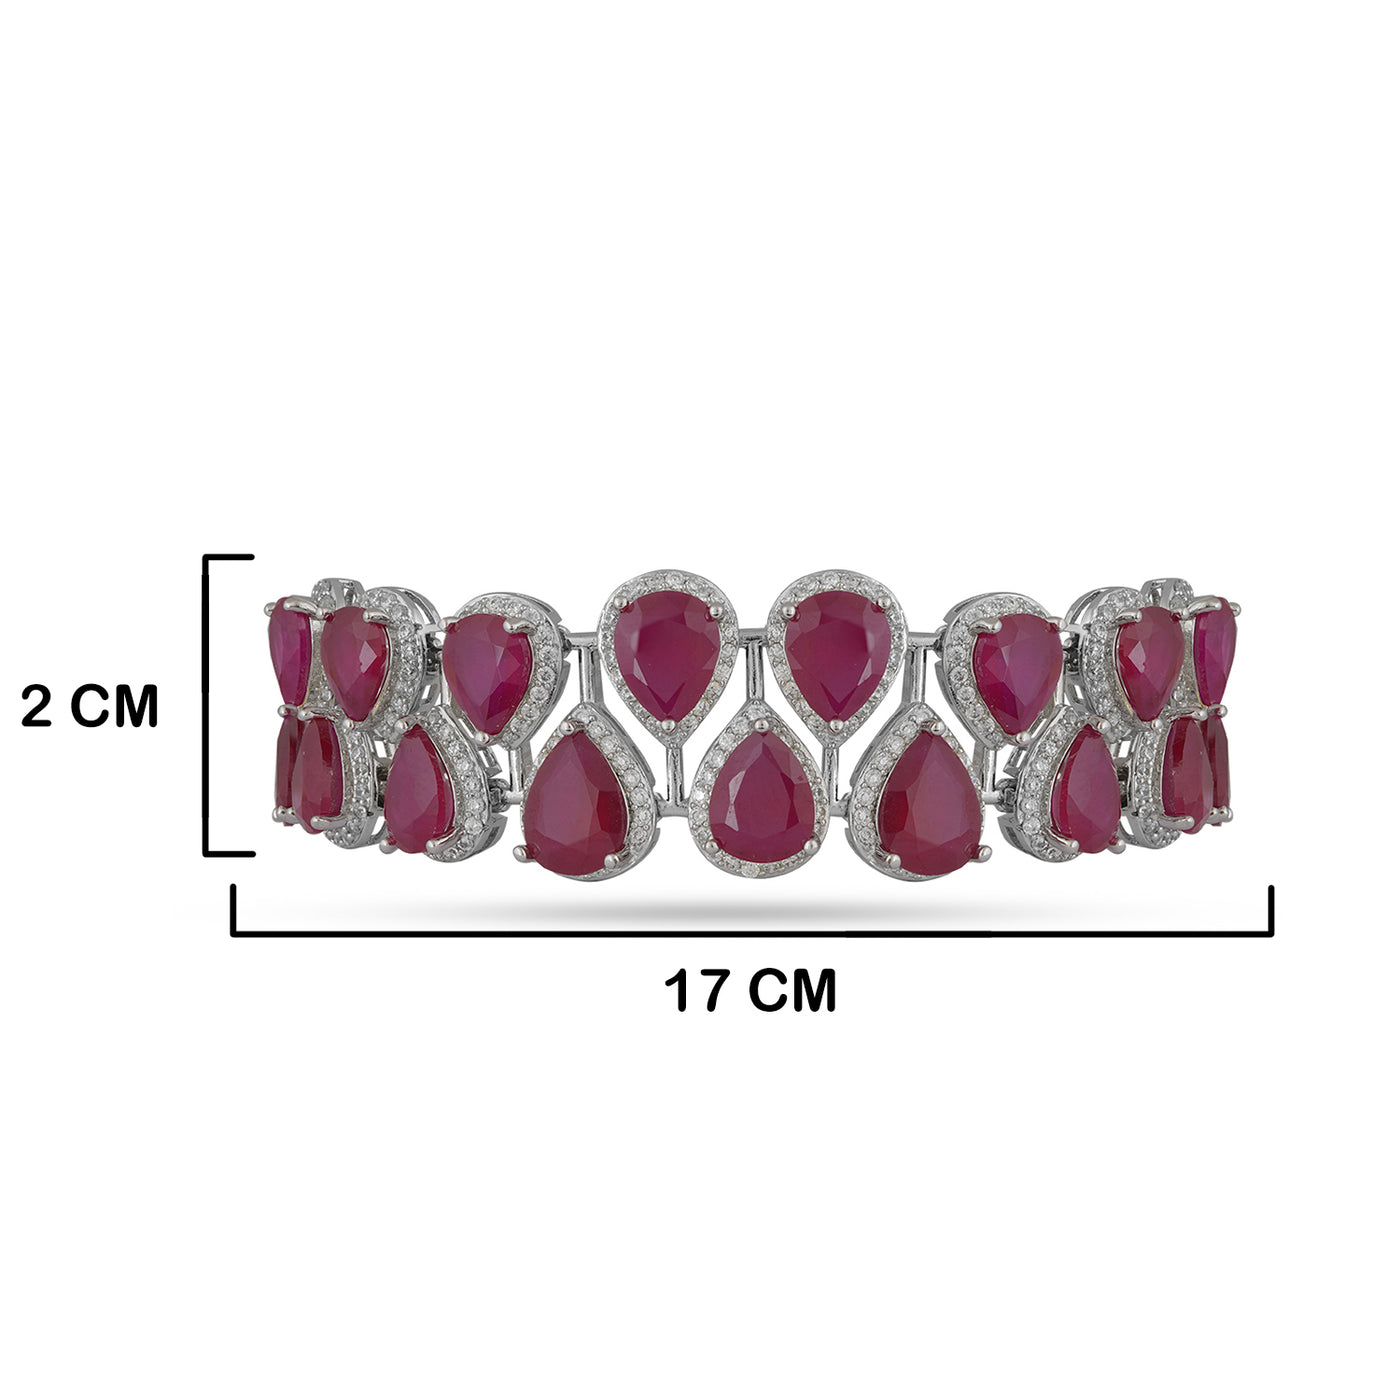 Cubic Zirconia Red Stone Bracelet with measurements in cm 2cm by 17cm.